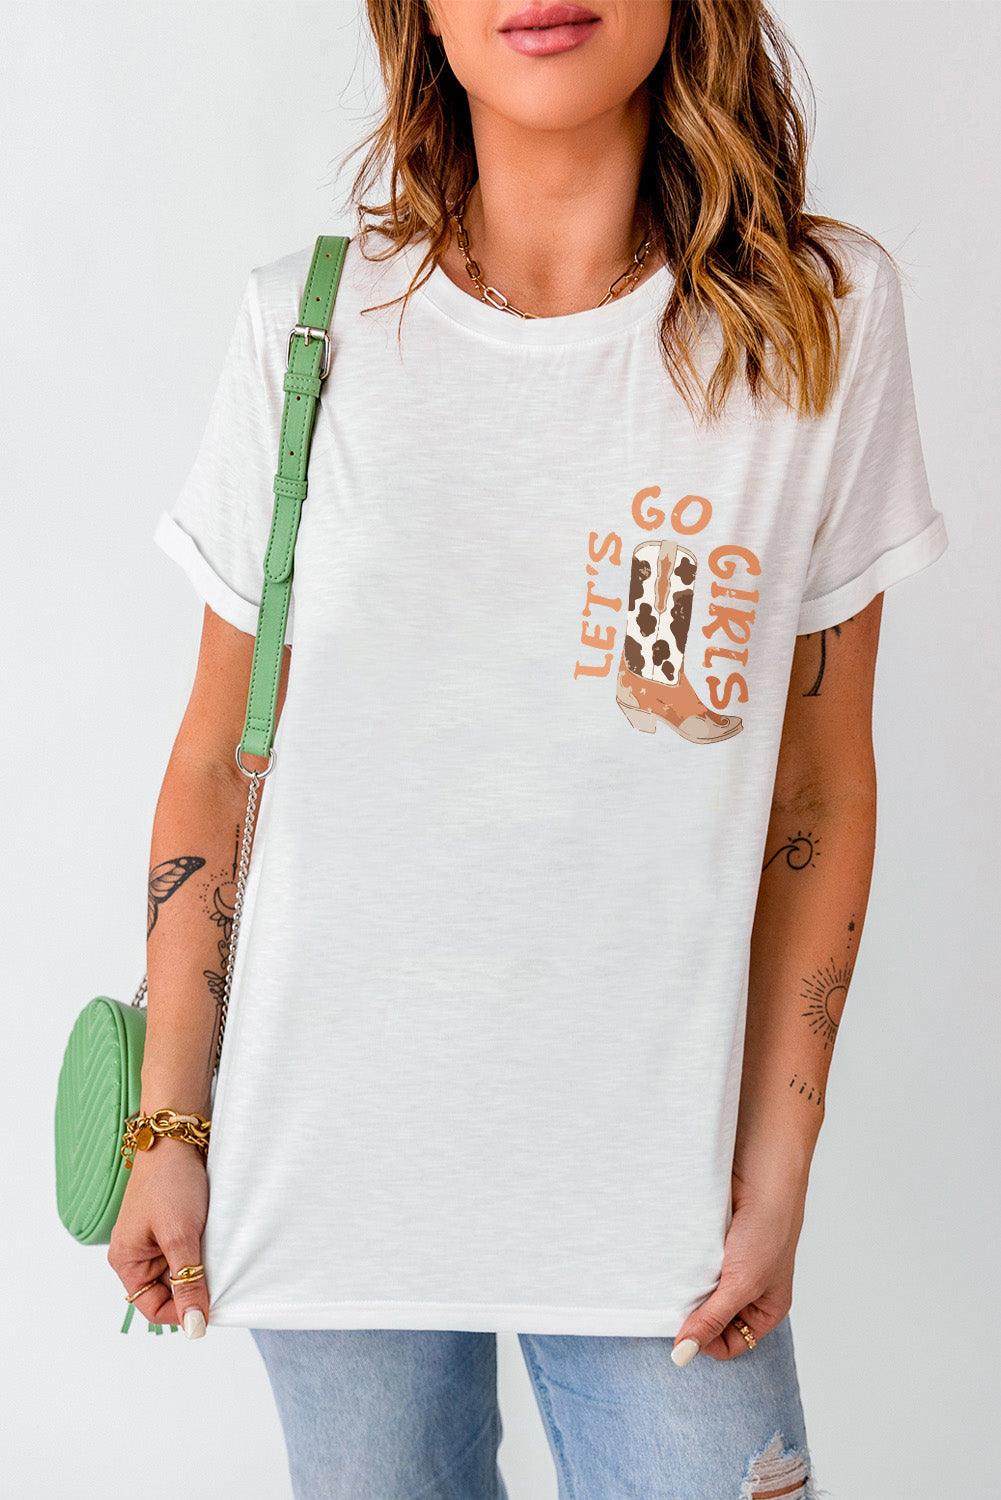 White Double-Side Cowboy Hat & Boots Graphic Tee - L & M Kee, LLC